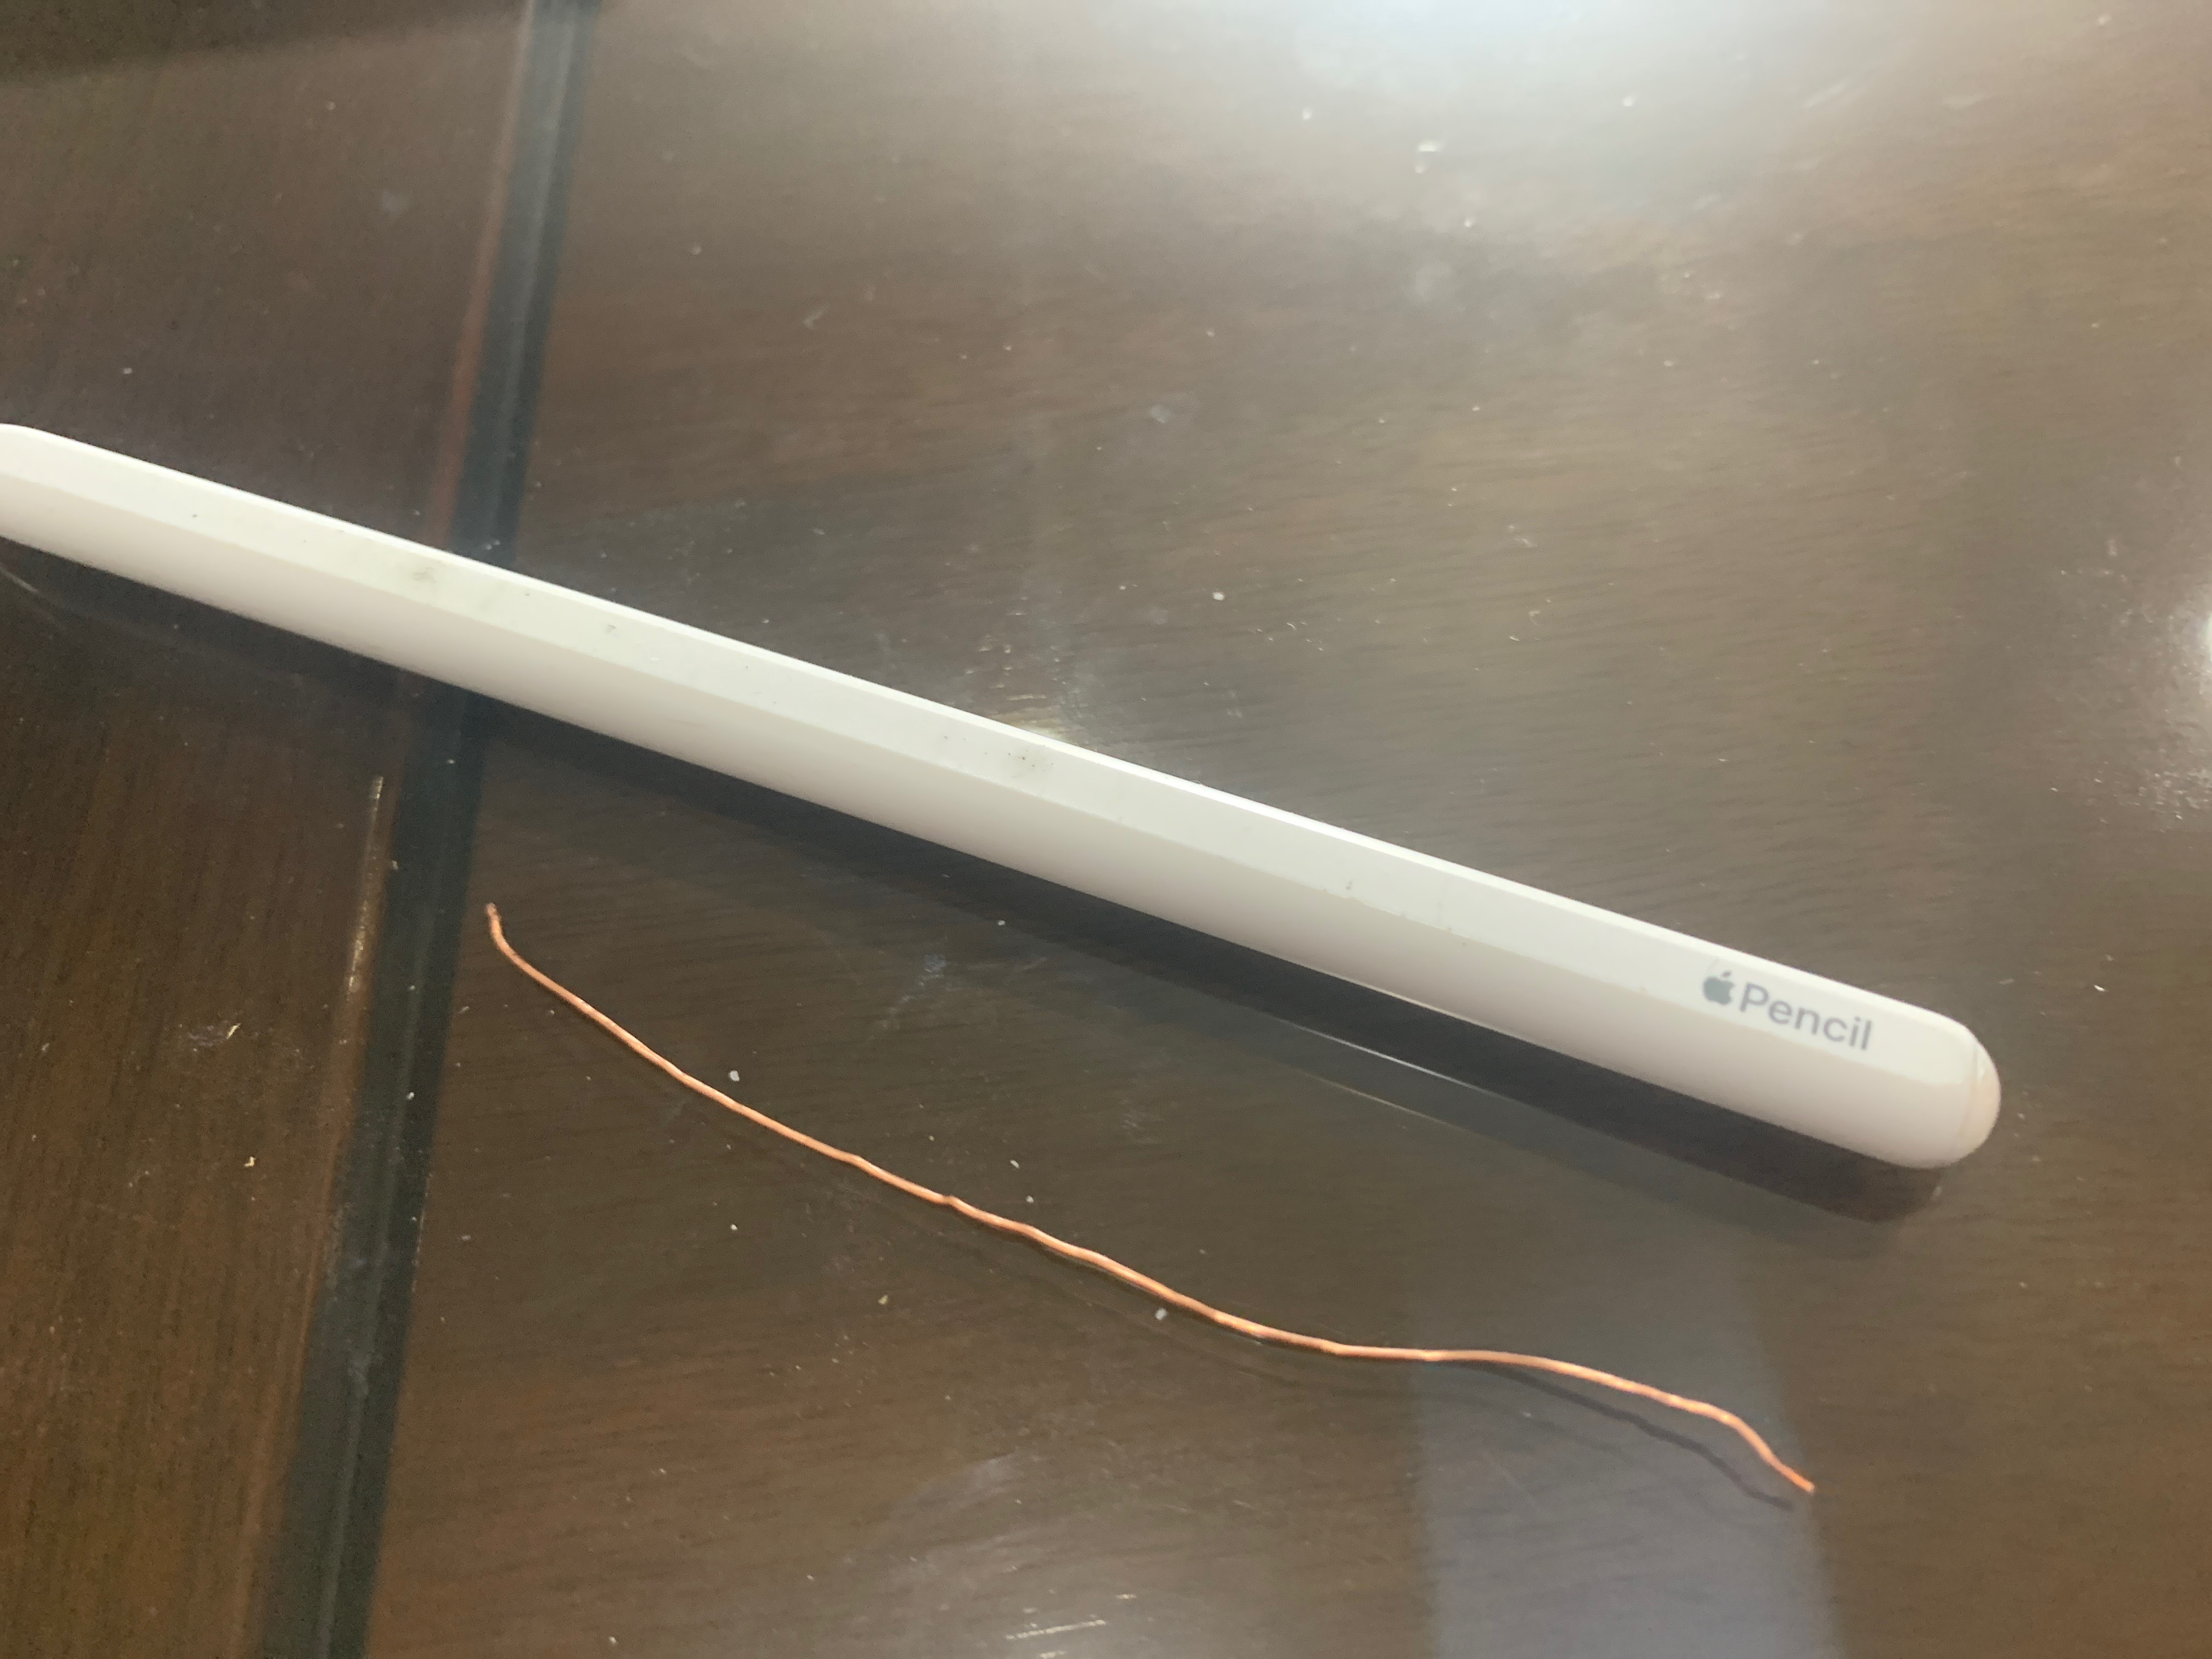 How do you charge a dead Apple Pencil?